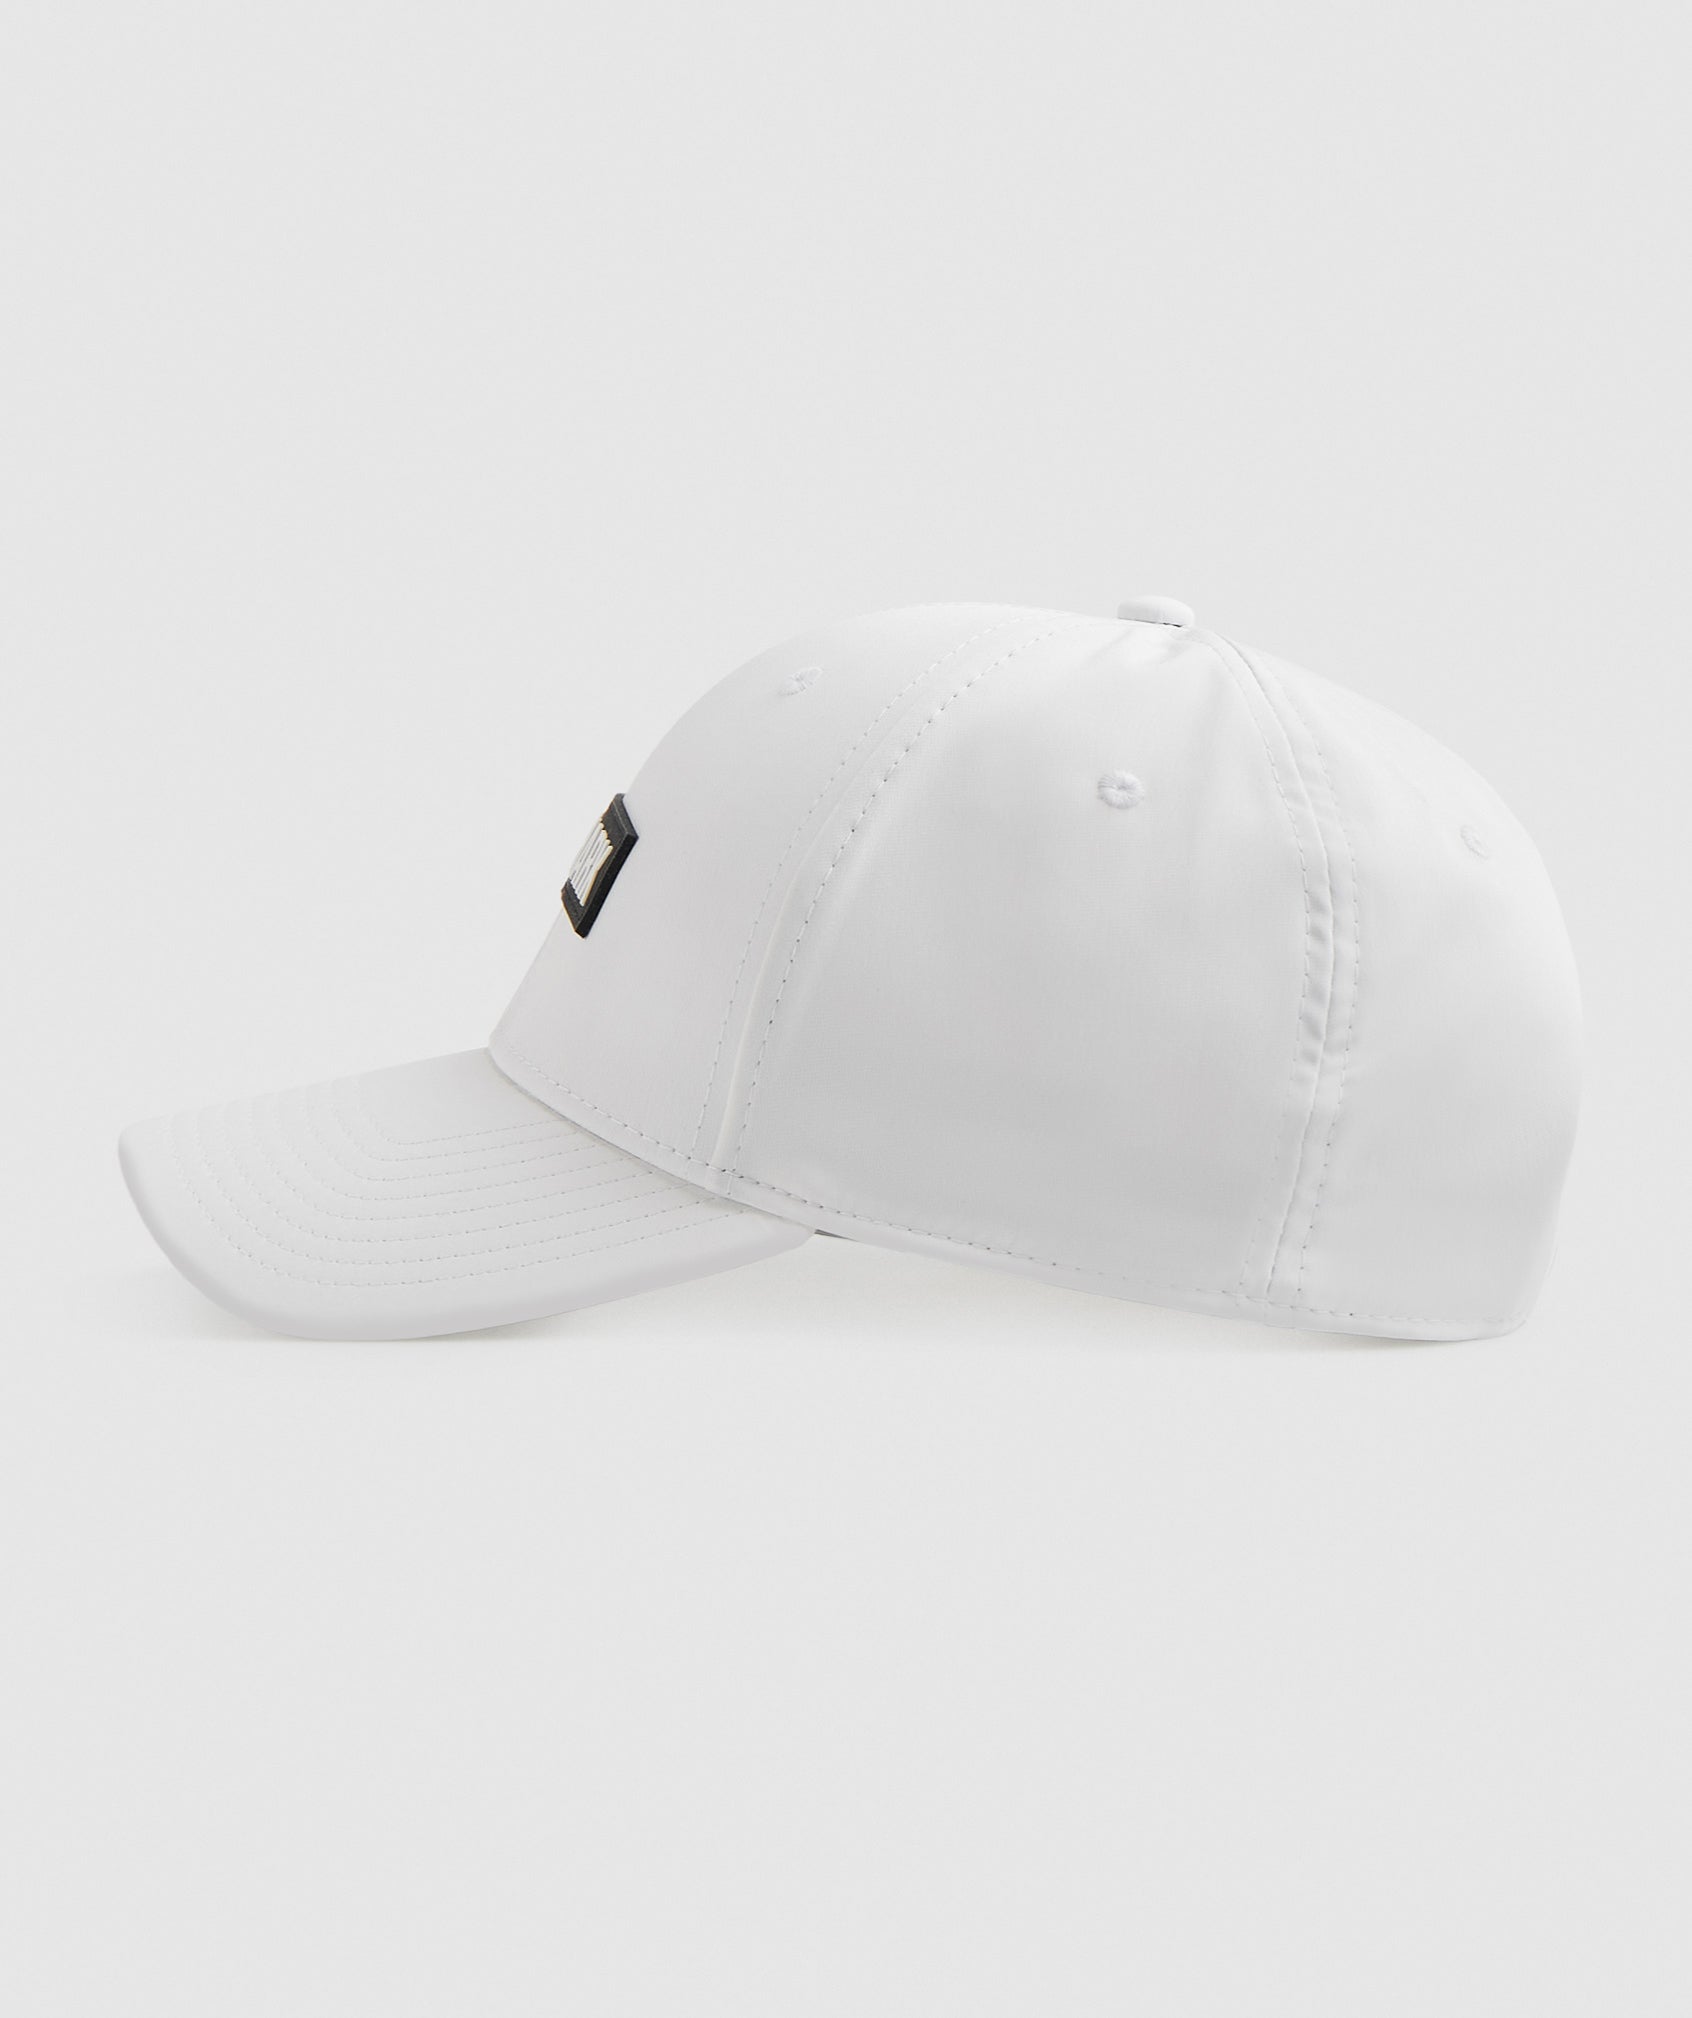 Snapback in White - view 4